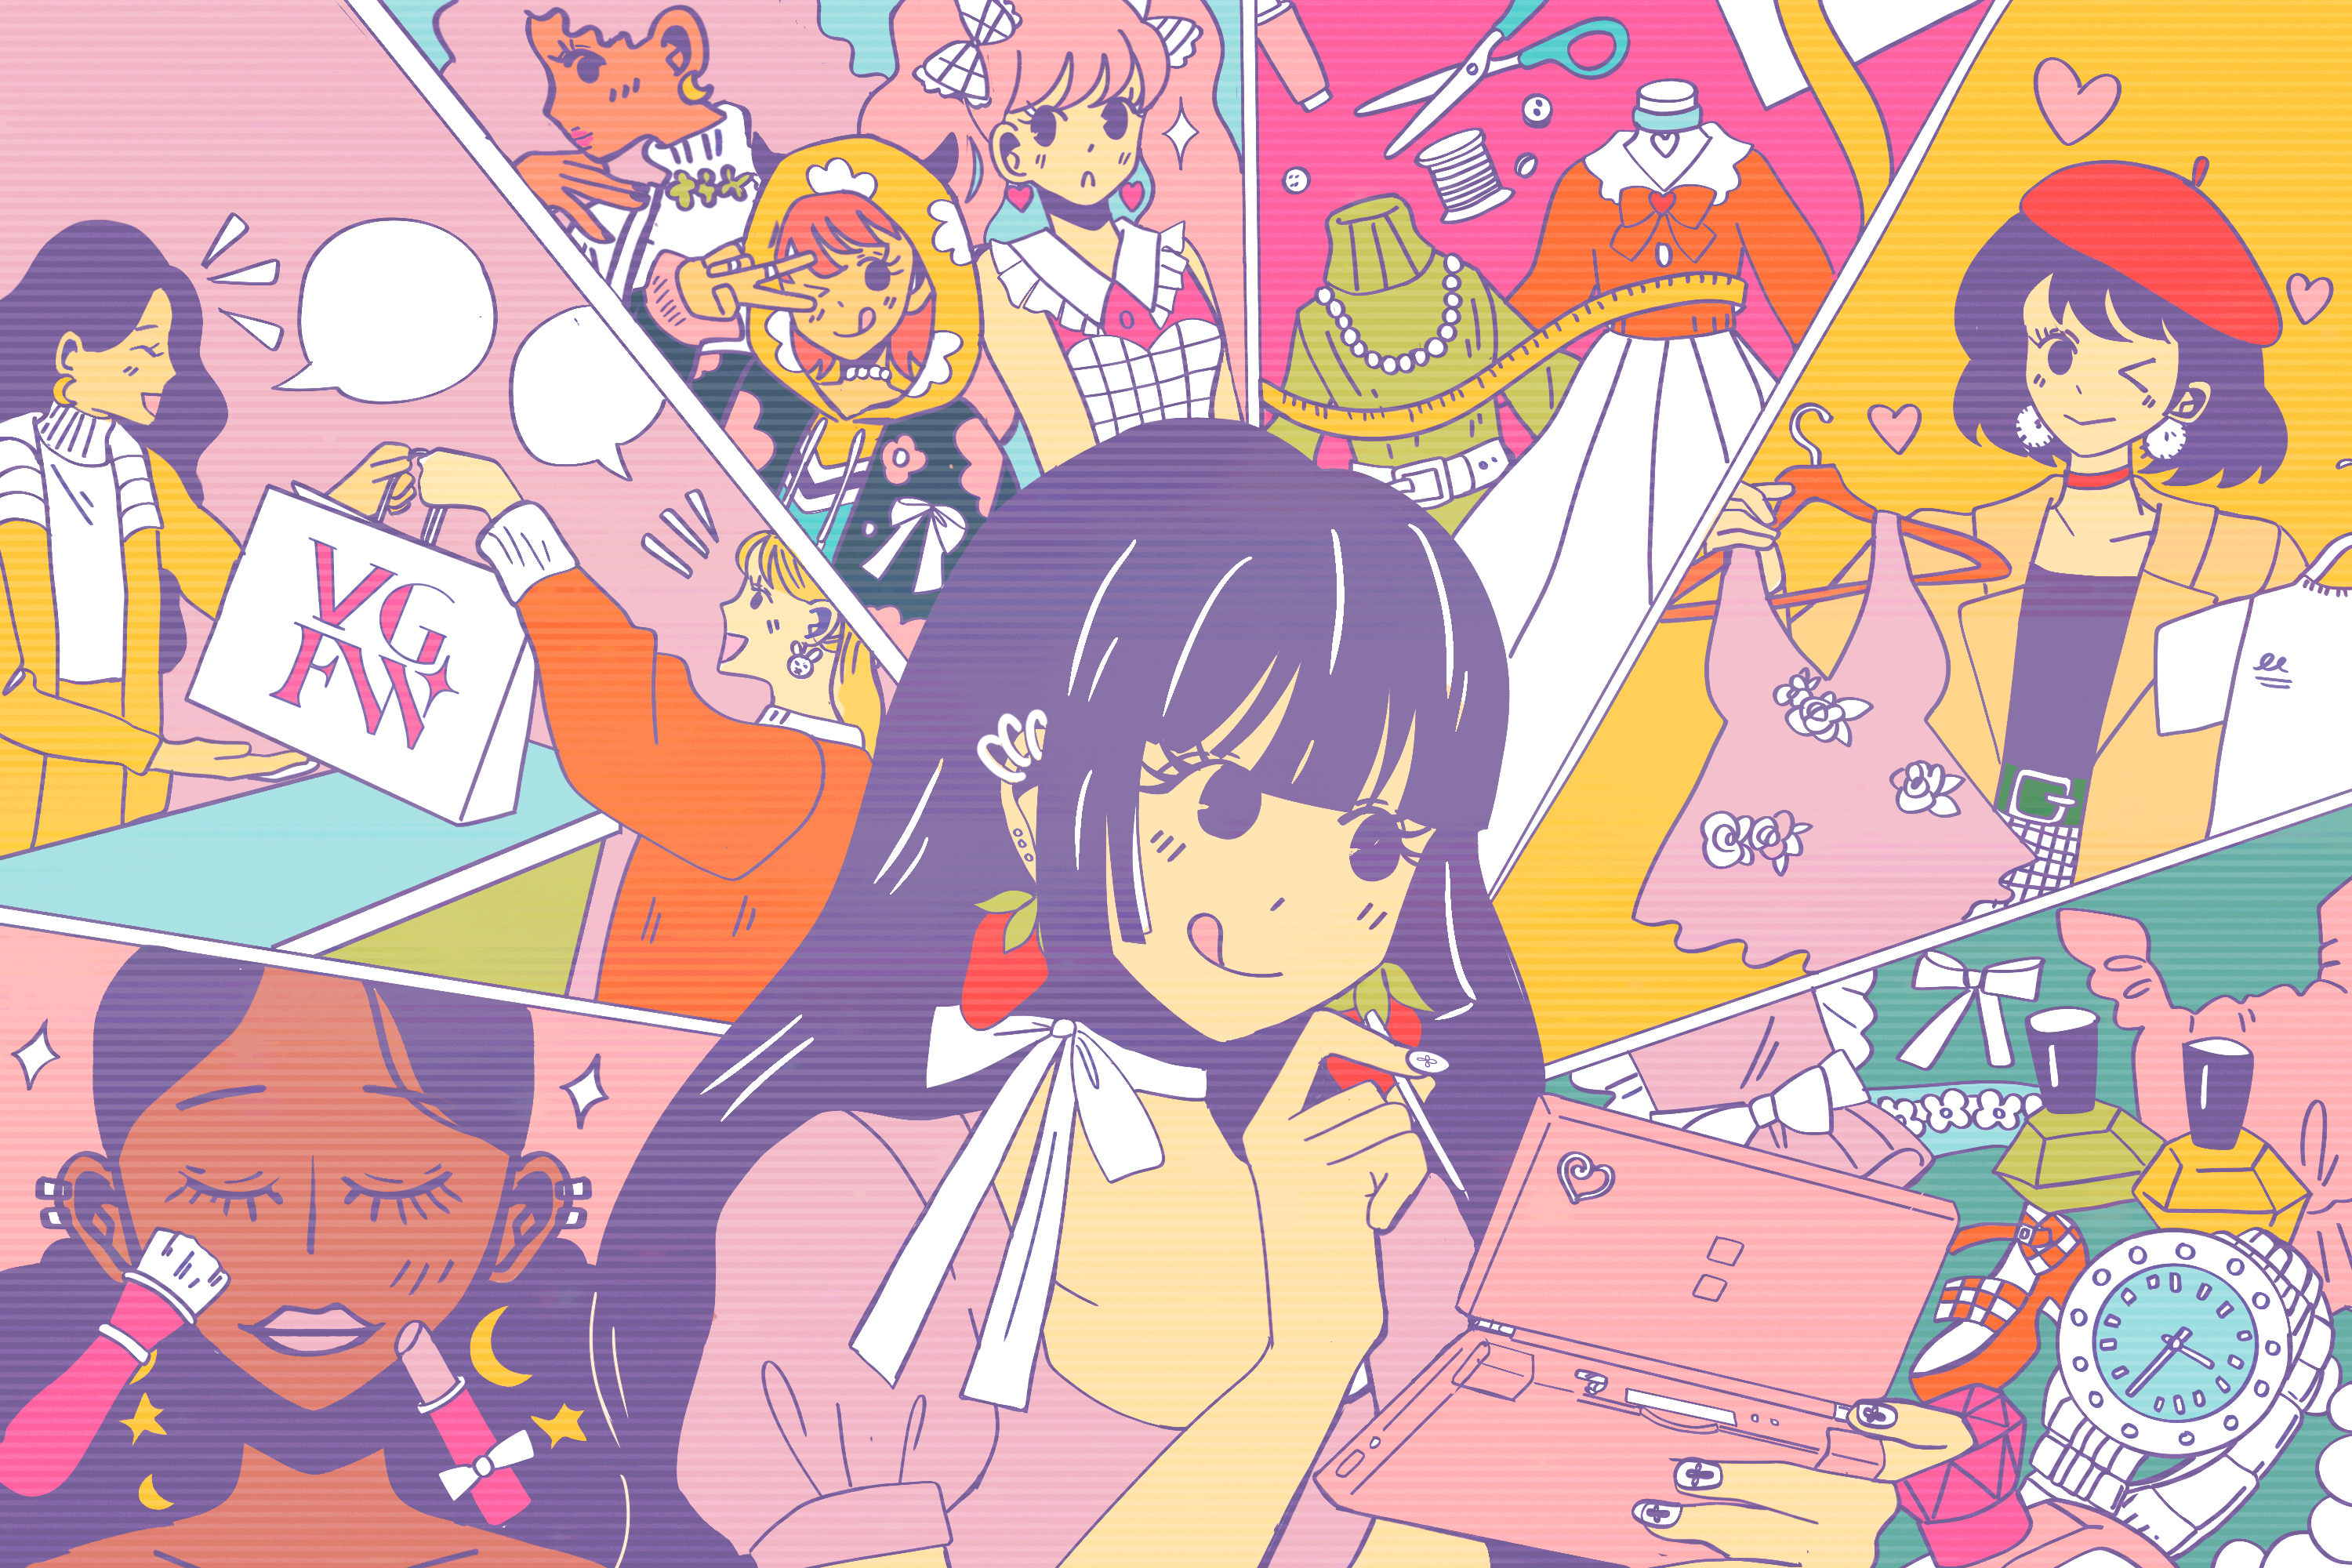 An illustration shows a woman playing Style Savvy while scenes from the game play out in the background